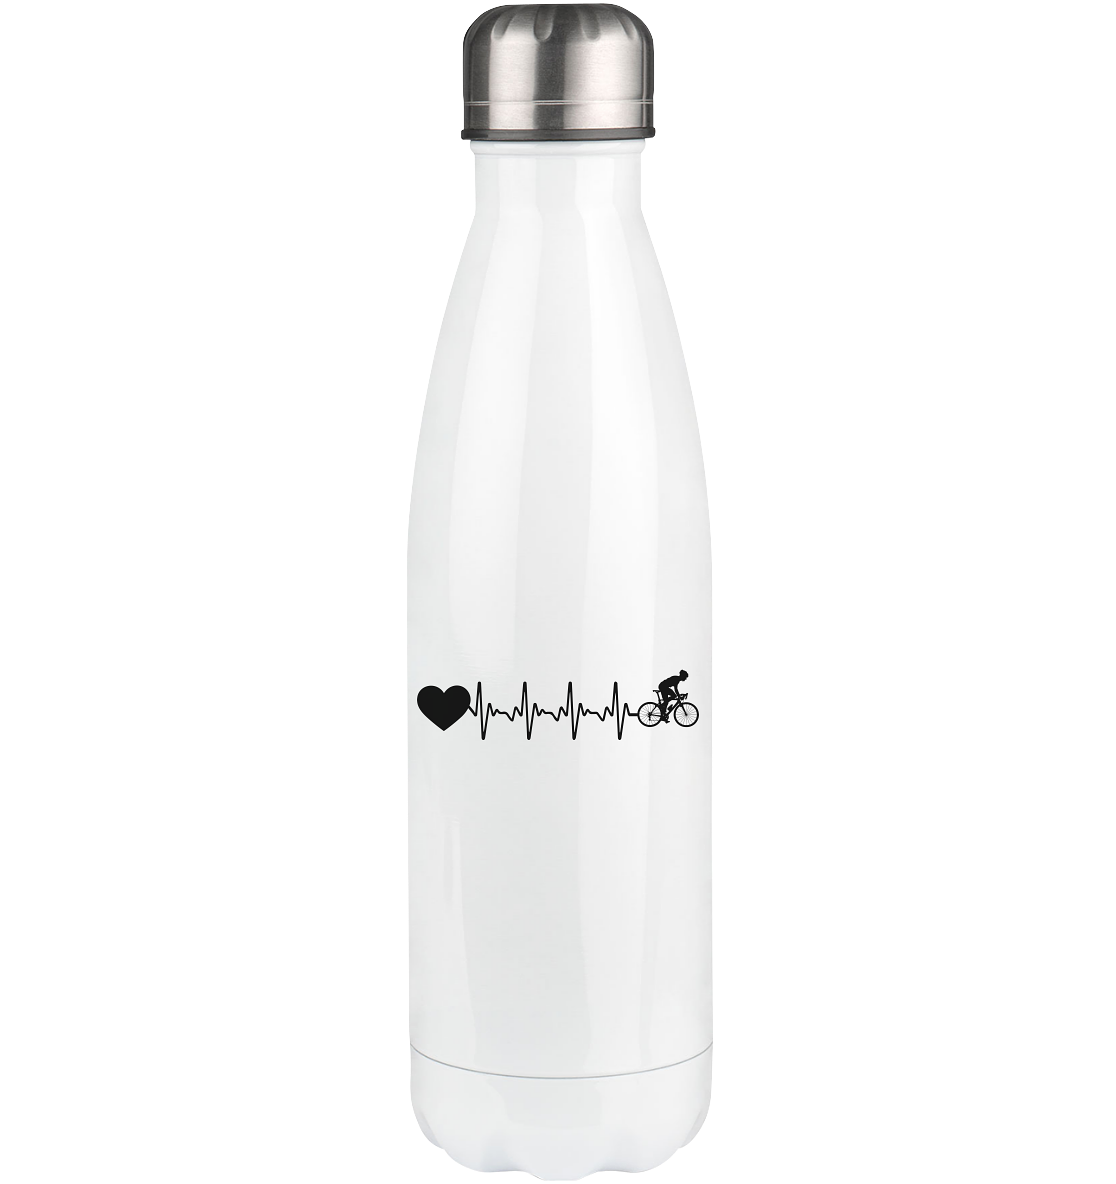 Heartbeat Heart and Cycling - Edelstahl Thermosflasche fahrrad 500ml